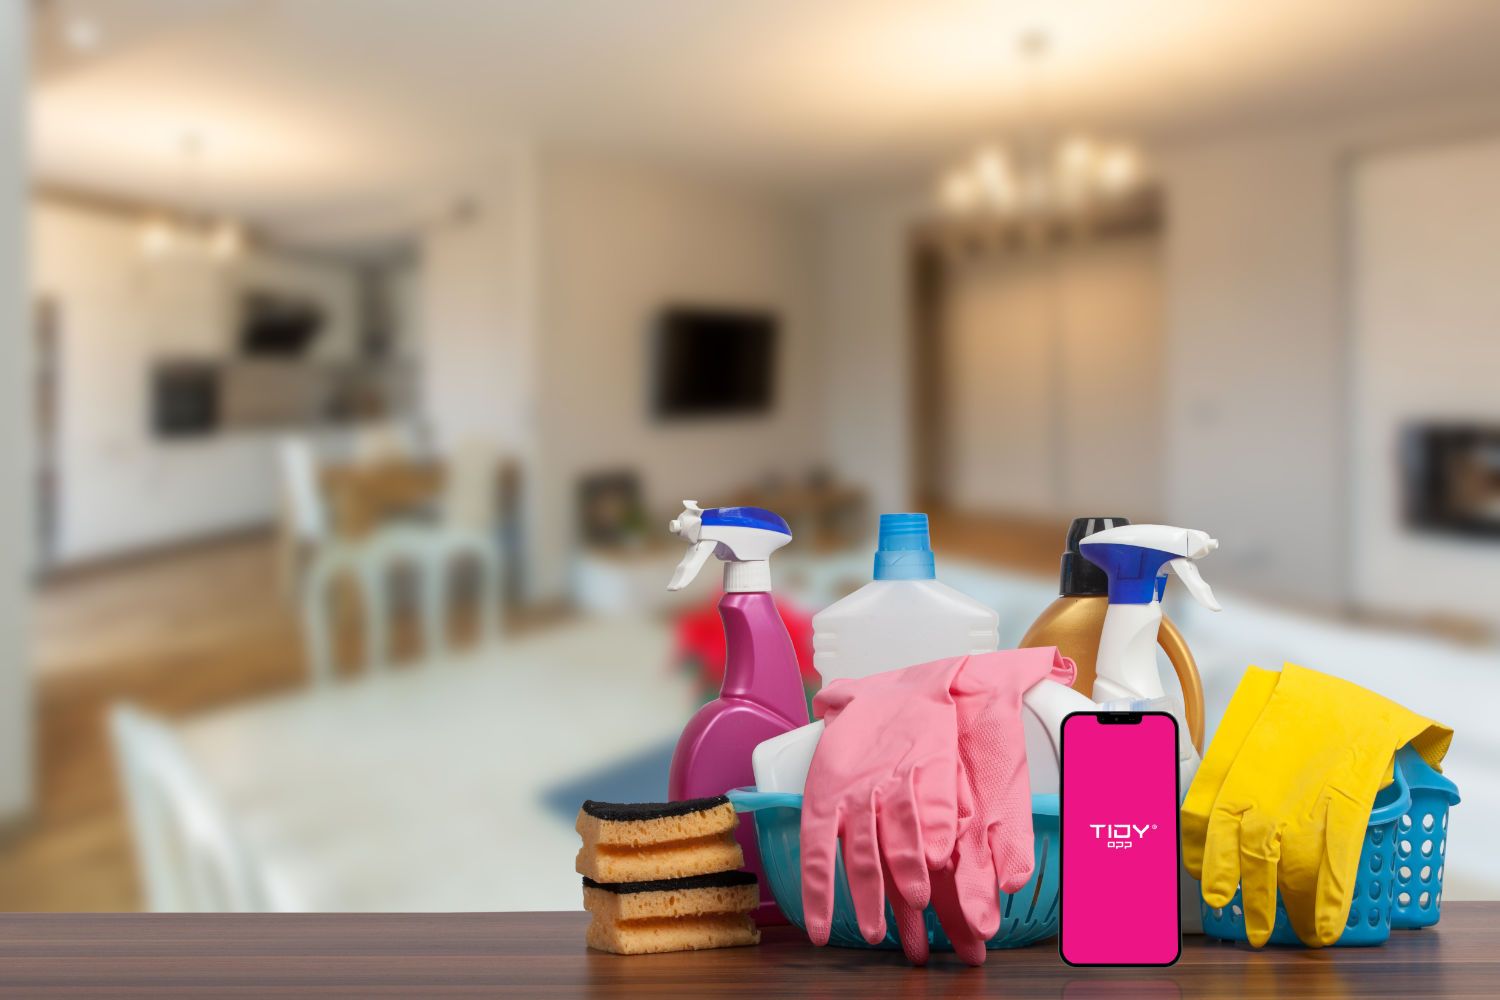 Breathe Maids Short-term Rental Cleaning